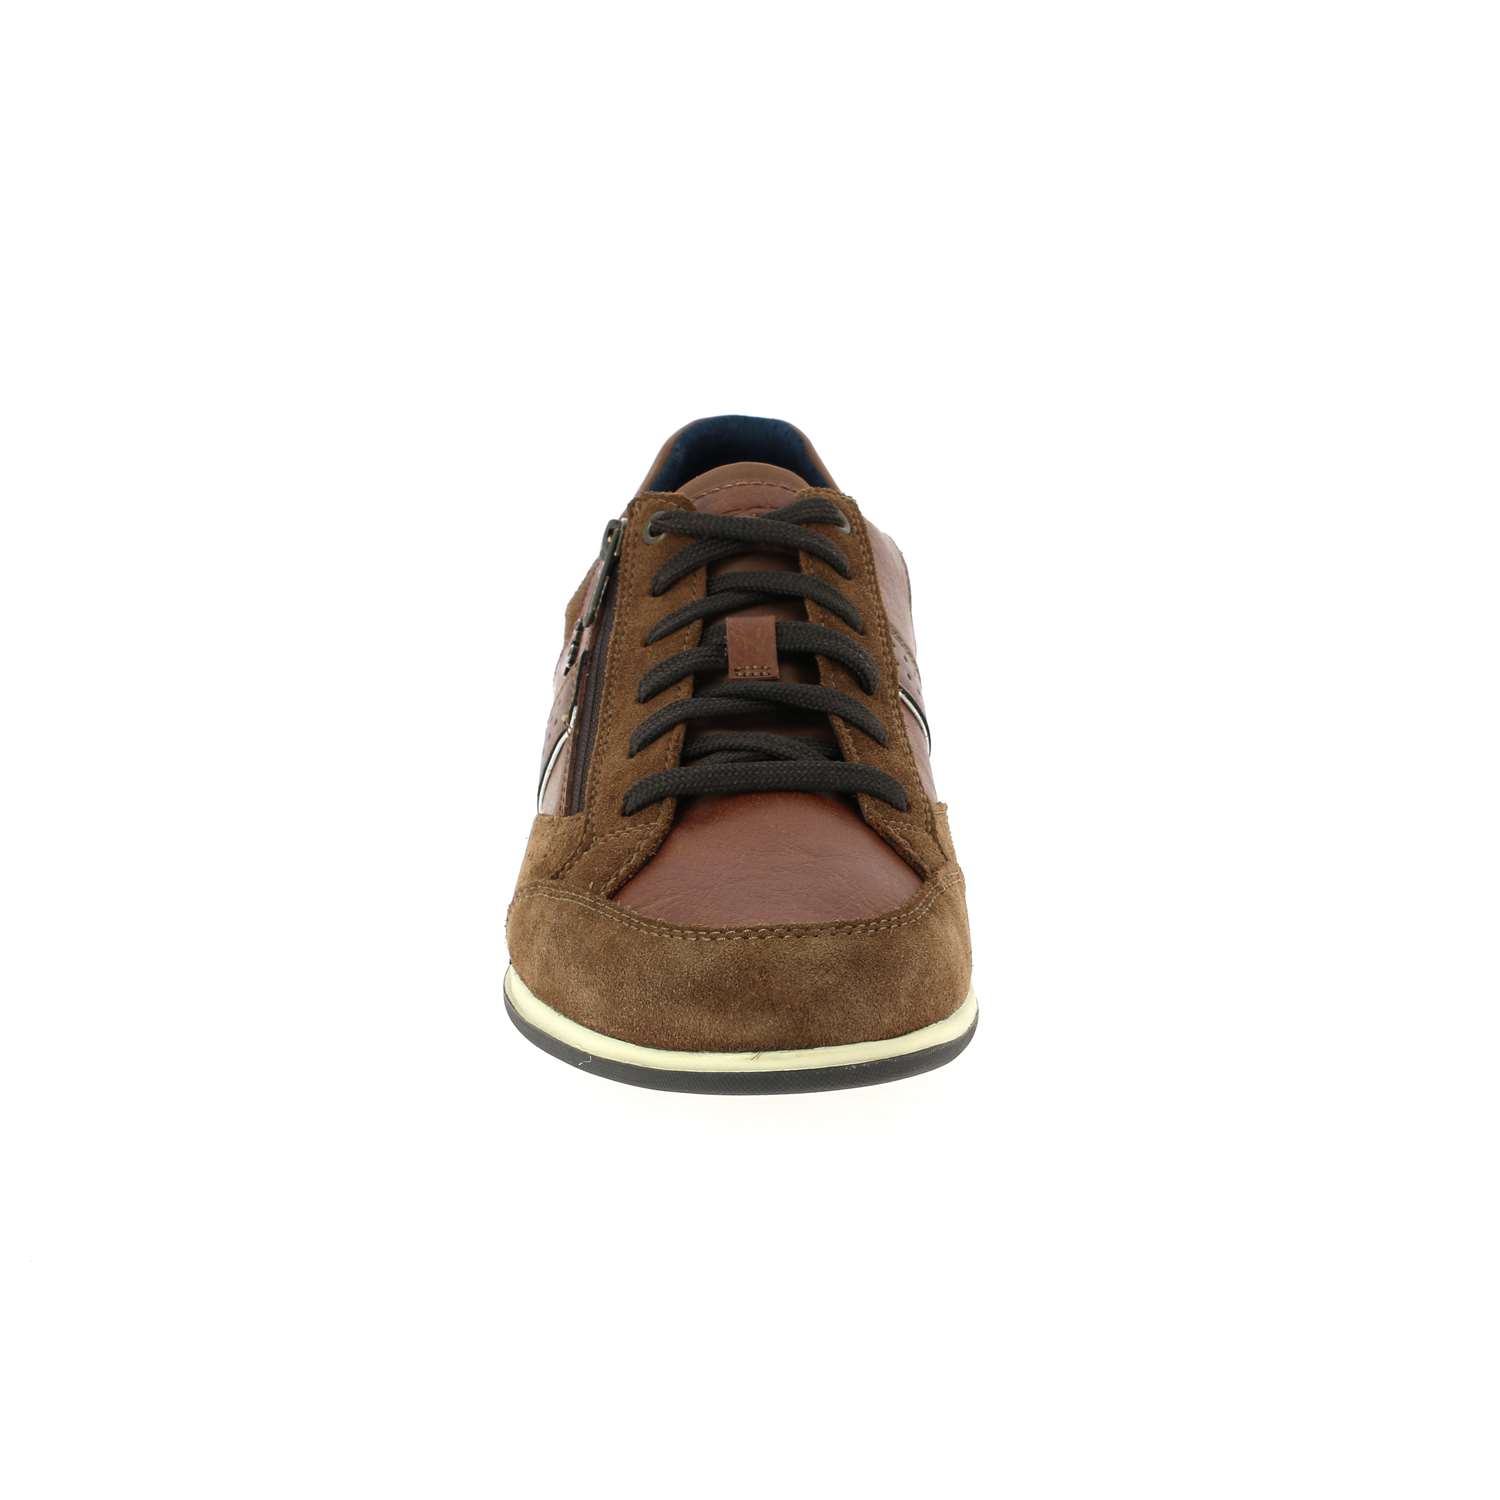 03 - RENAN - GEOX - Chaussures à lacets - 